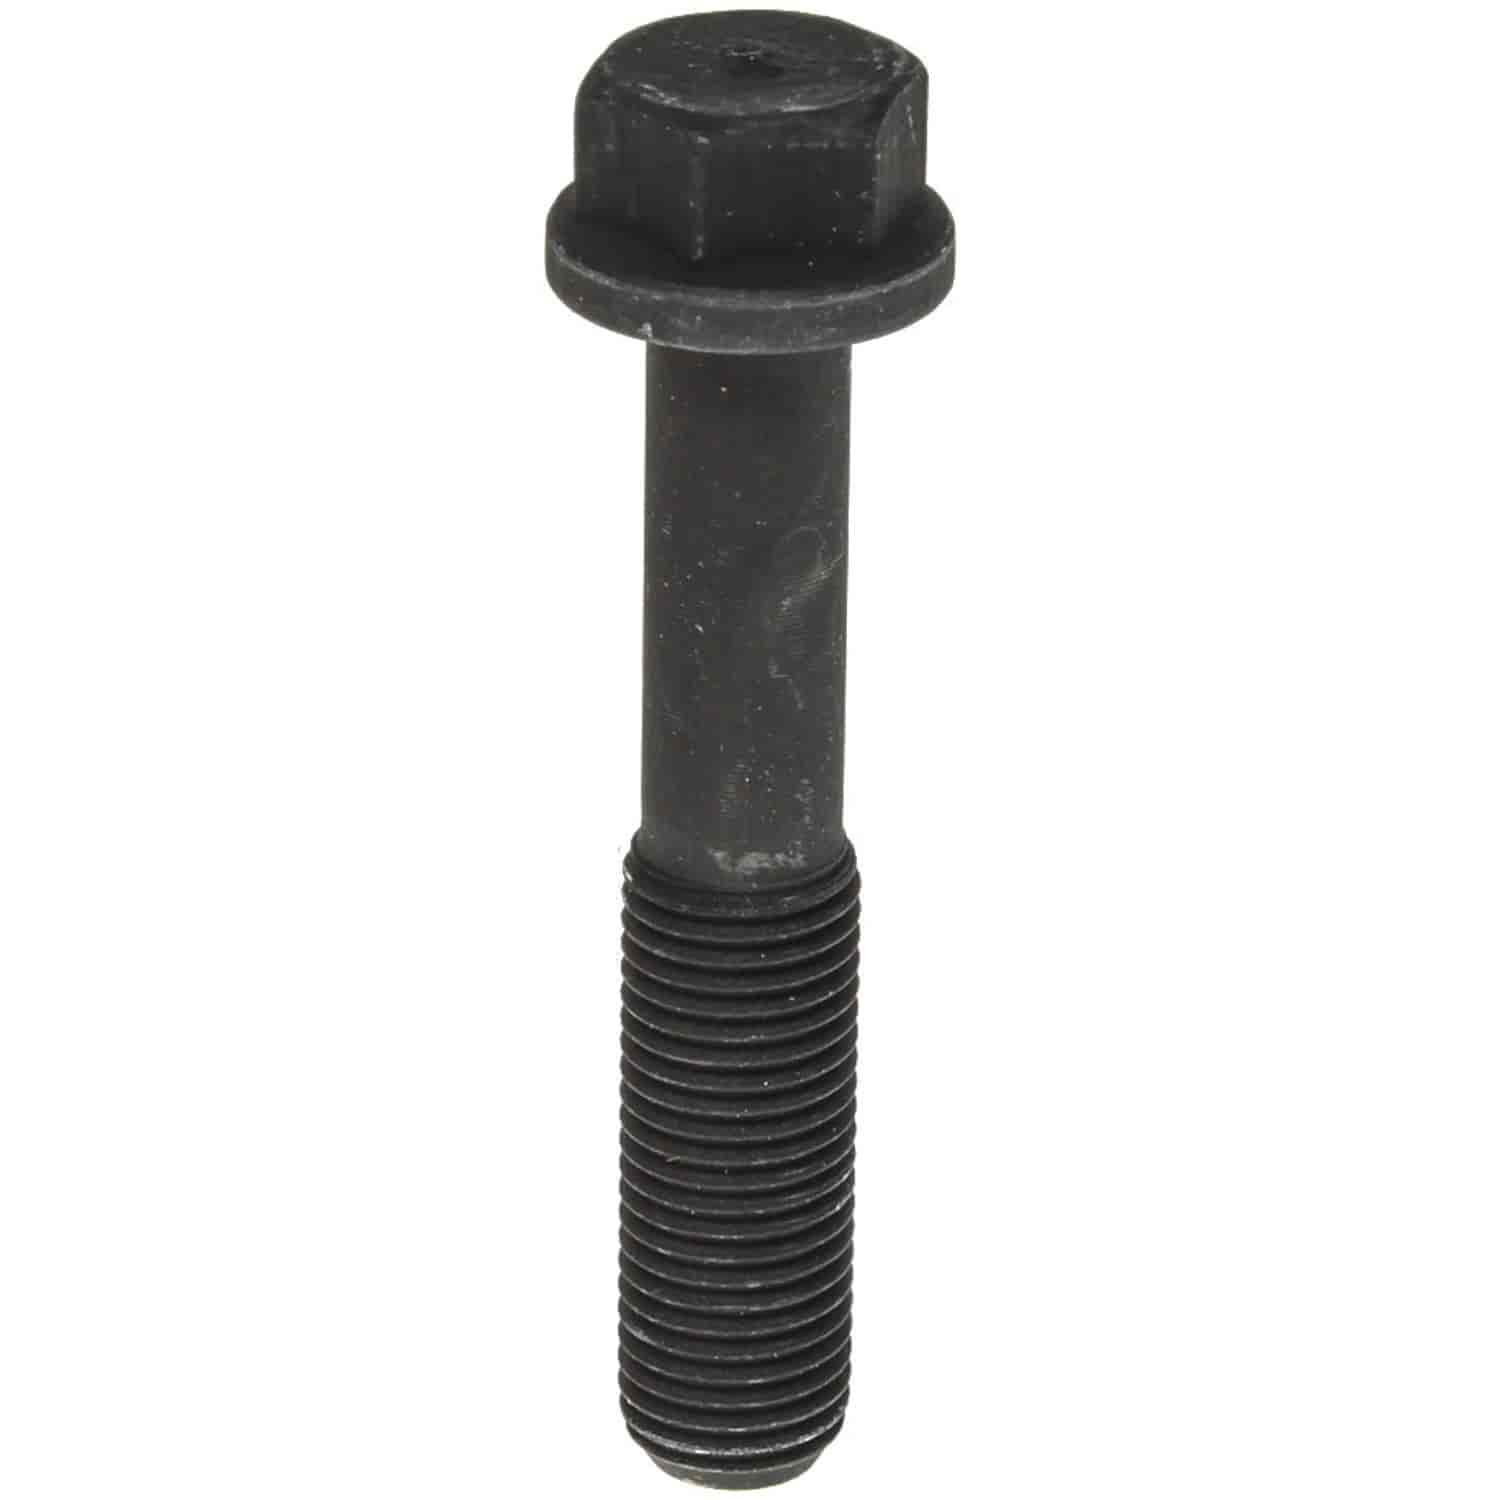 Connecting Rod Bolts John Deere 531 and 619